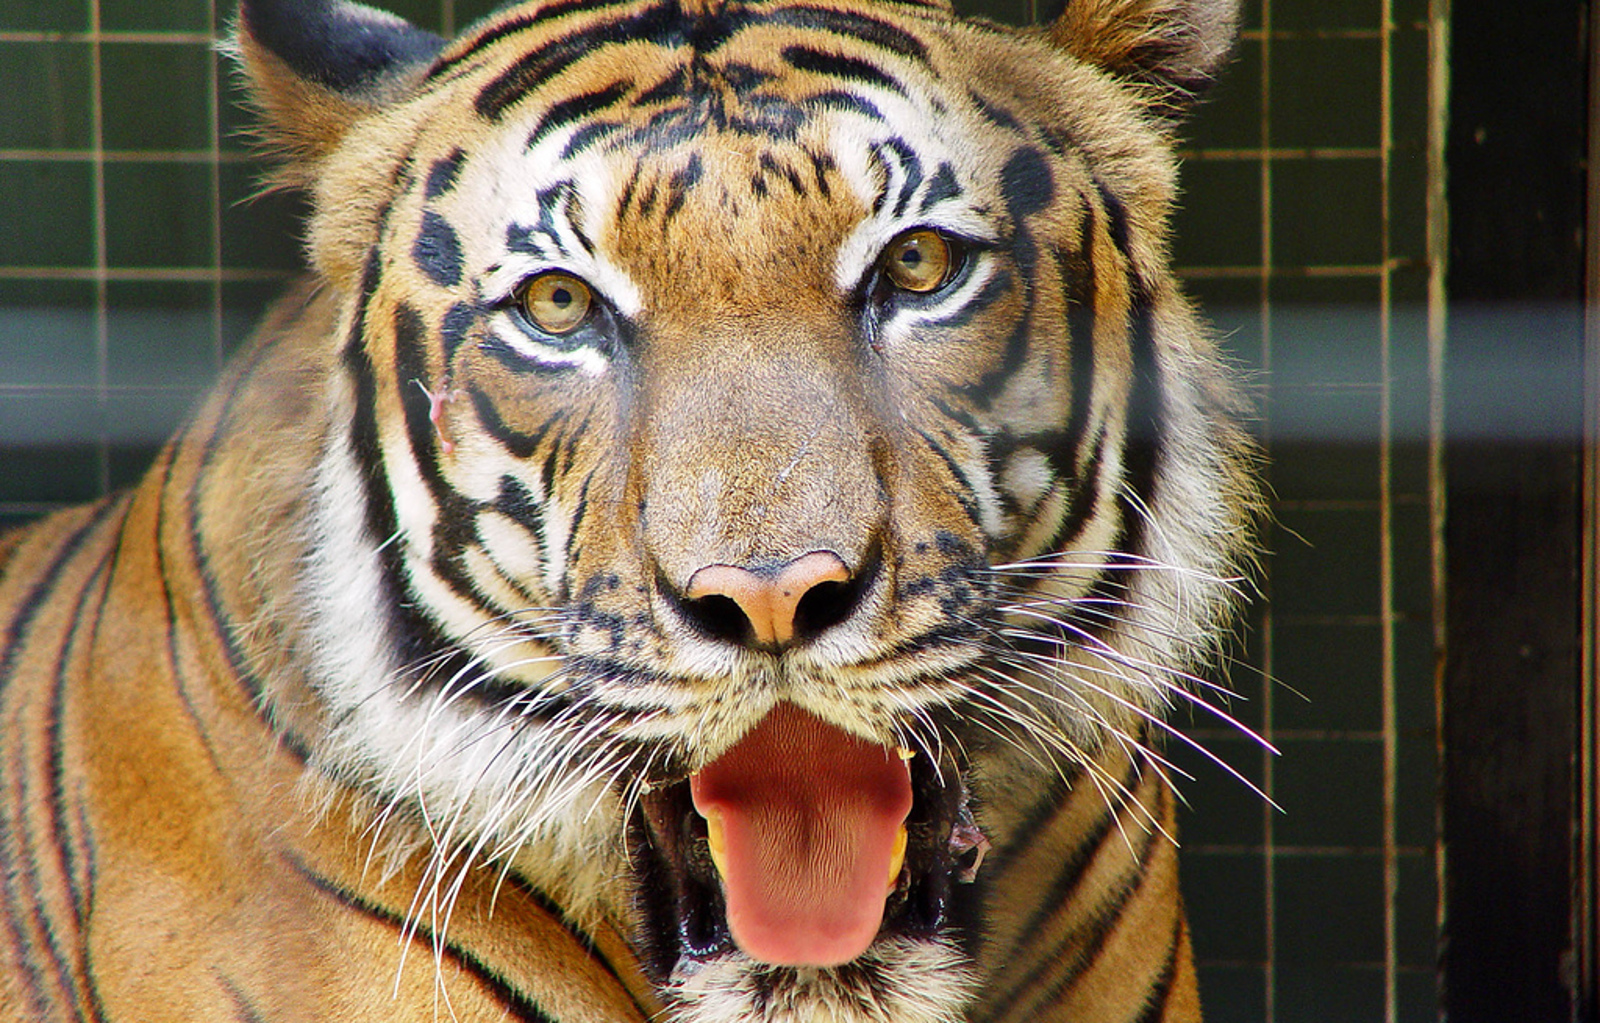 4 Ridiculous Reasons People Give for Keeping Exotic Animals as Pets